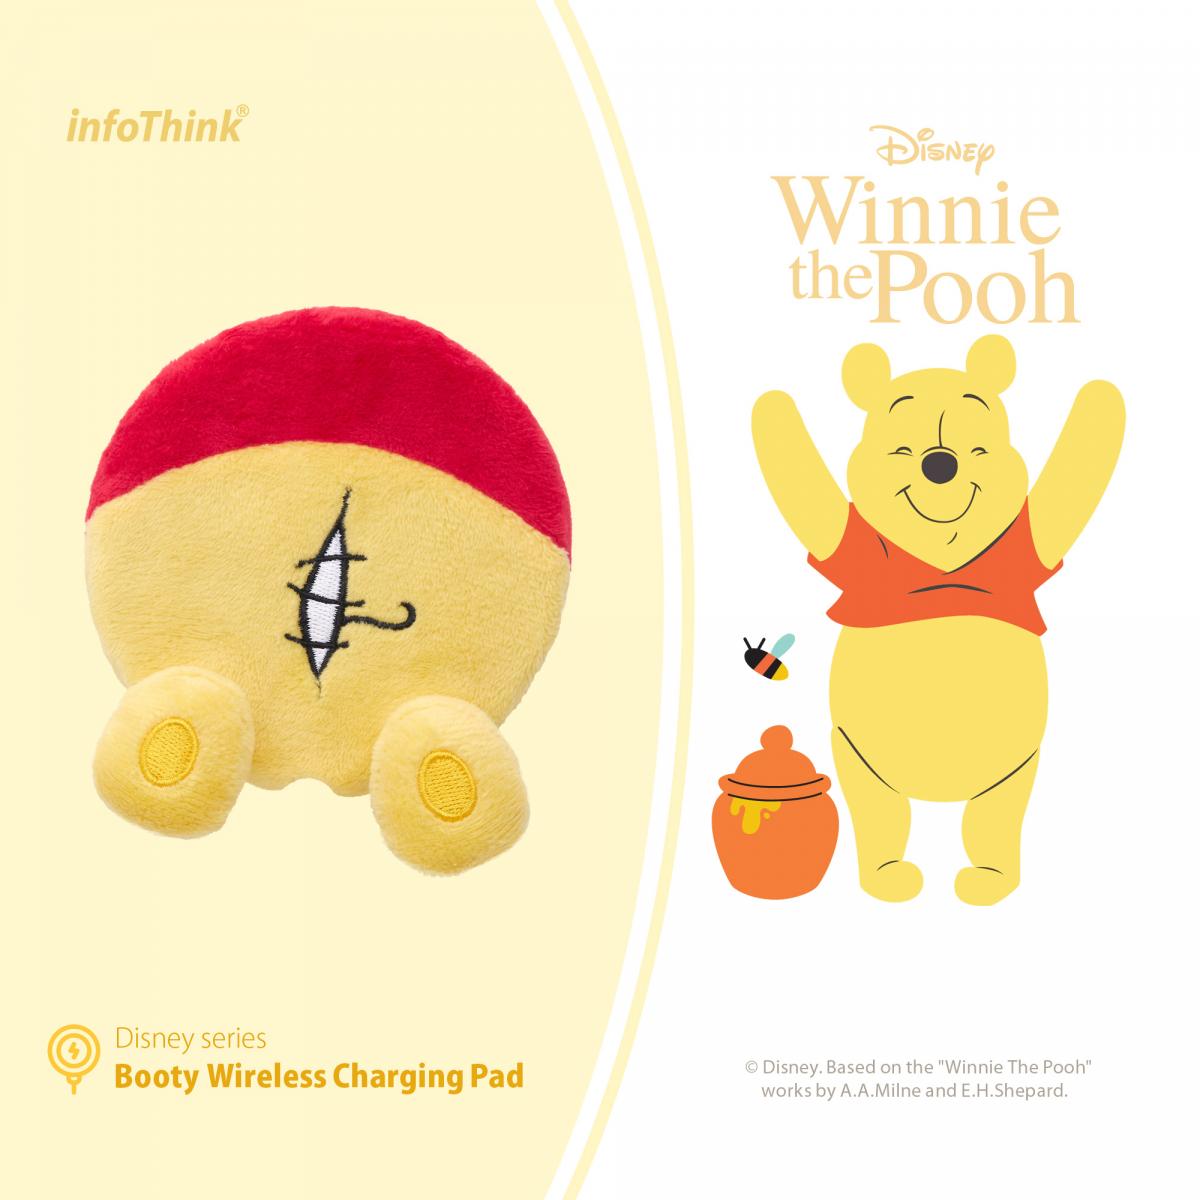 InfoThink Disney iWCQ-200 Booty Wireless Charger Charging Pad Winnie The Pooh ver